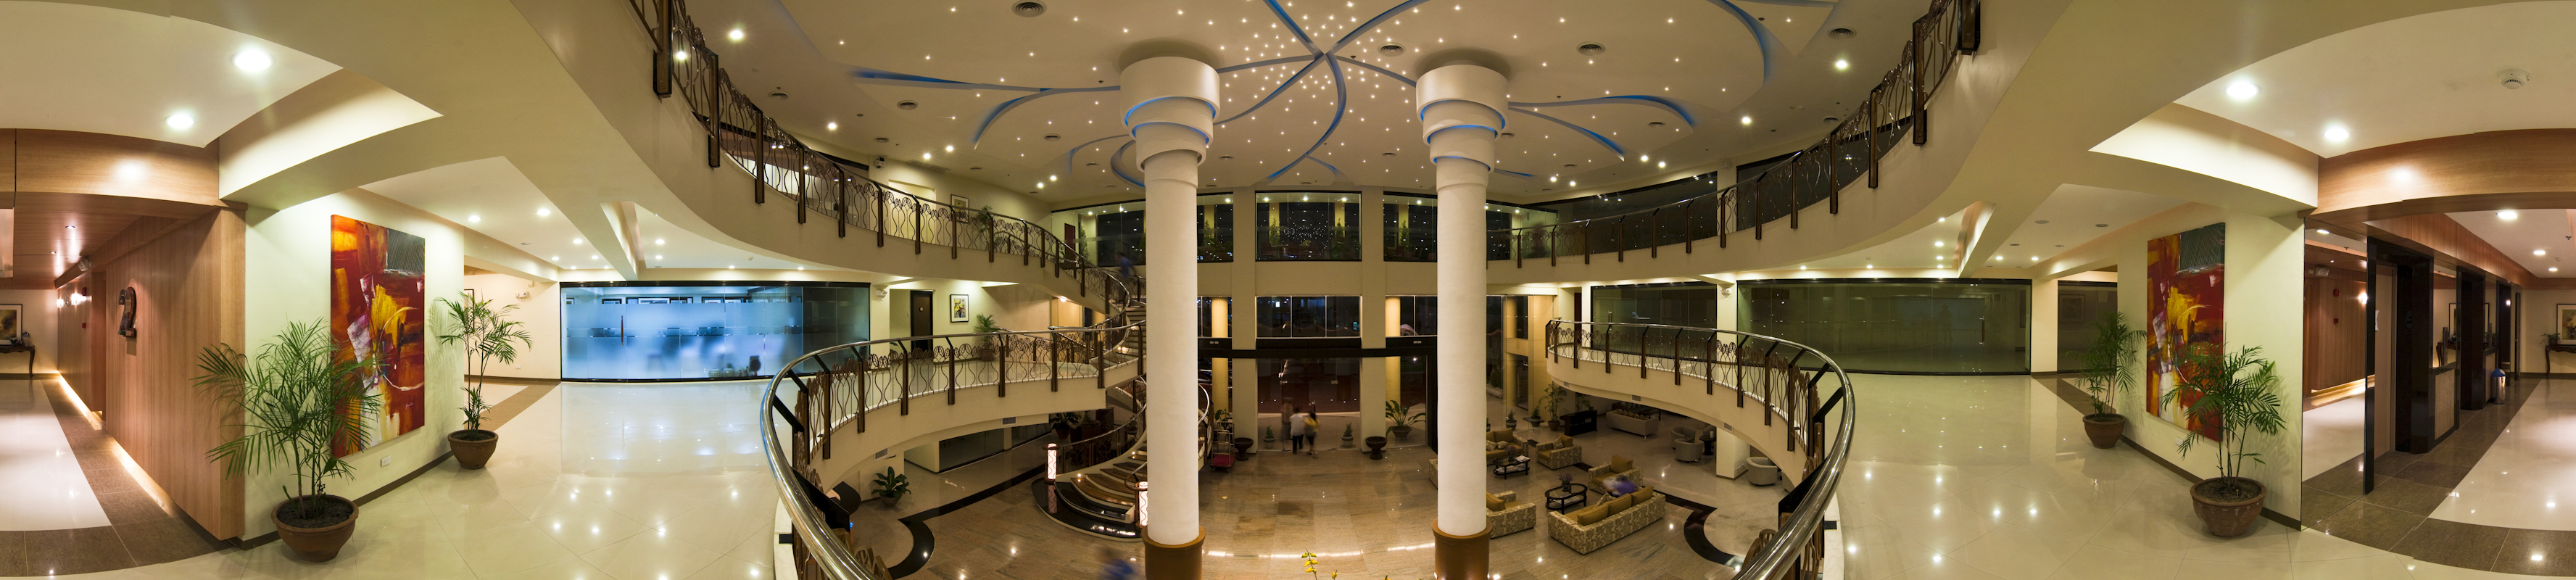 The Pinnacle Hotel and Suites - Lobby 6